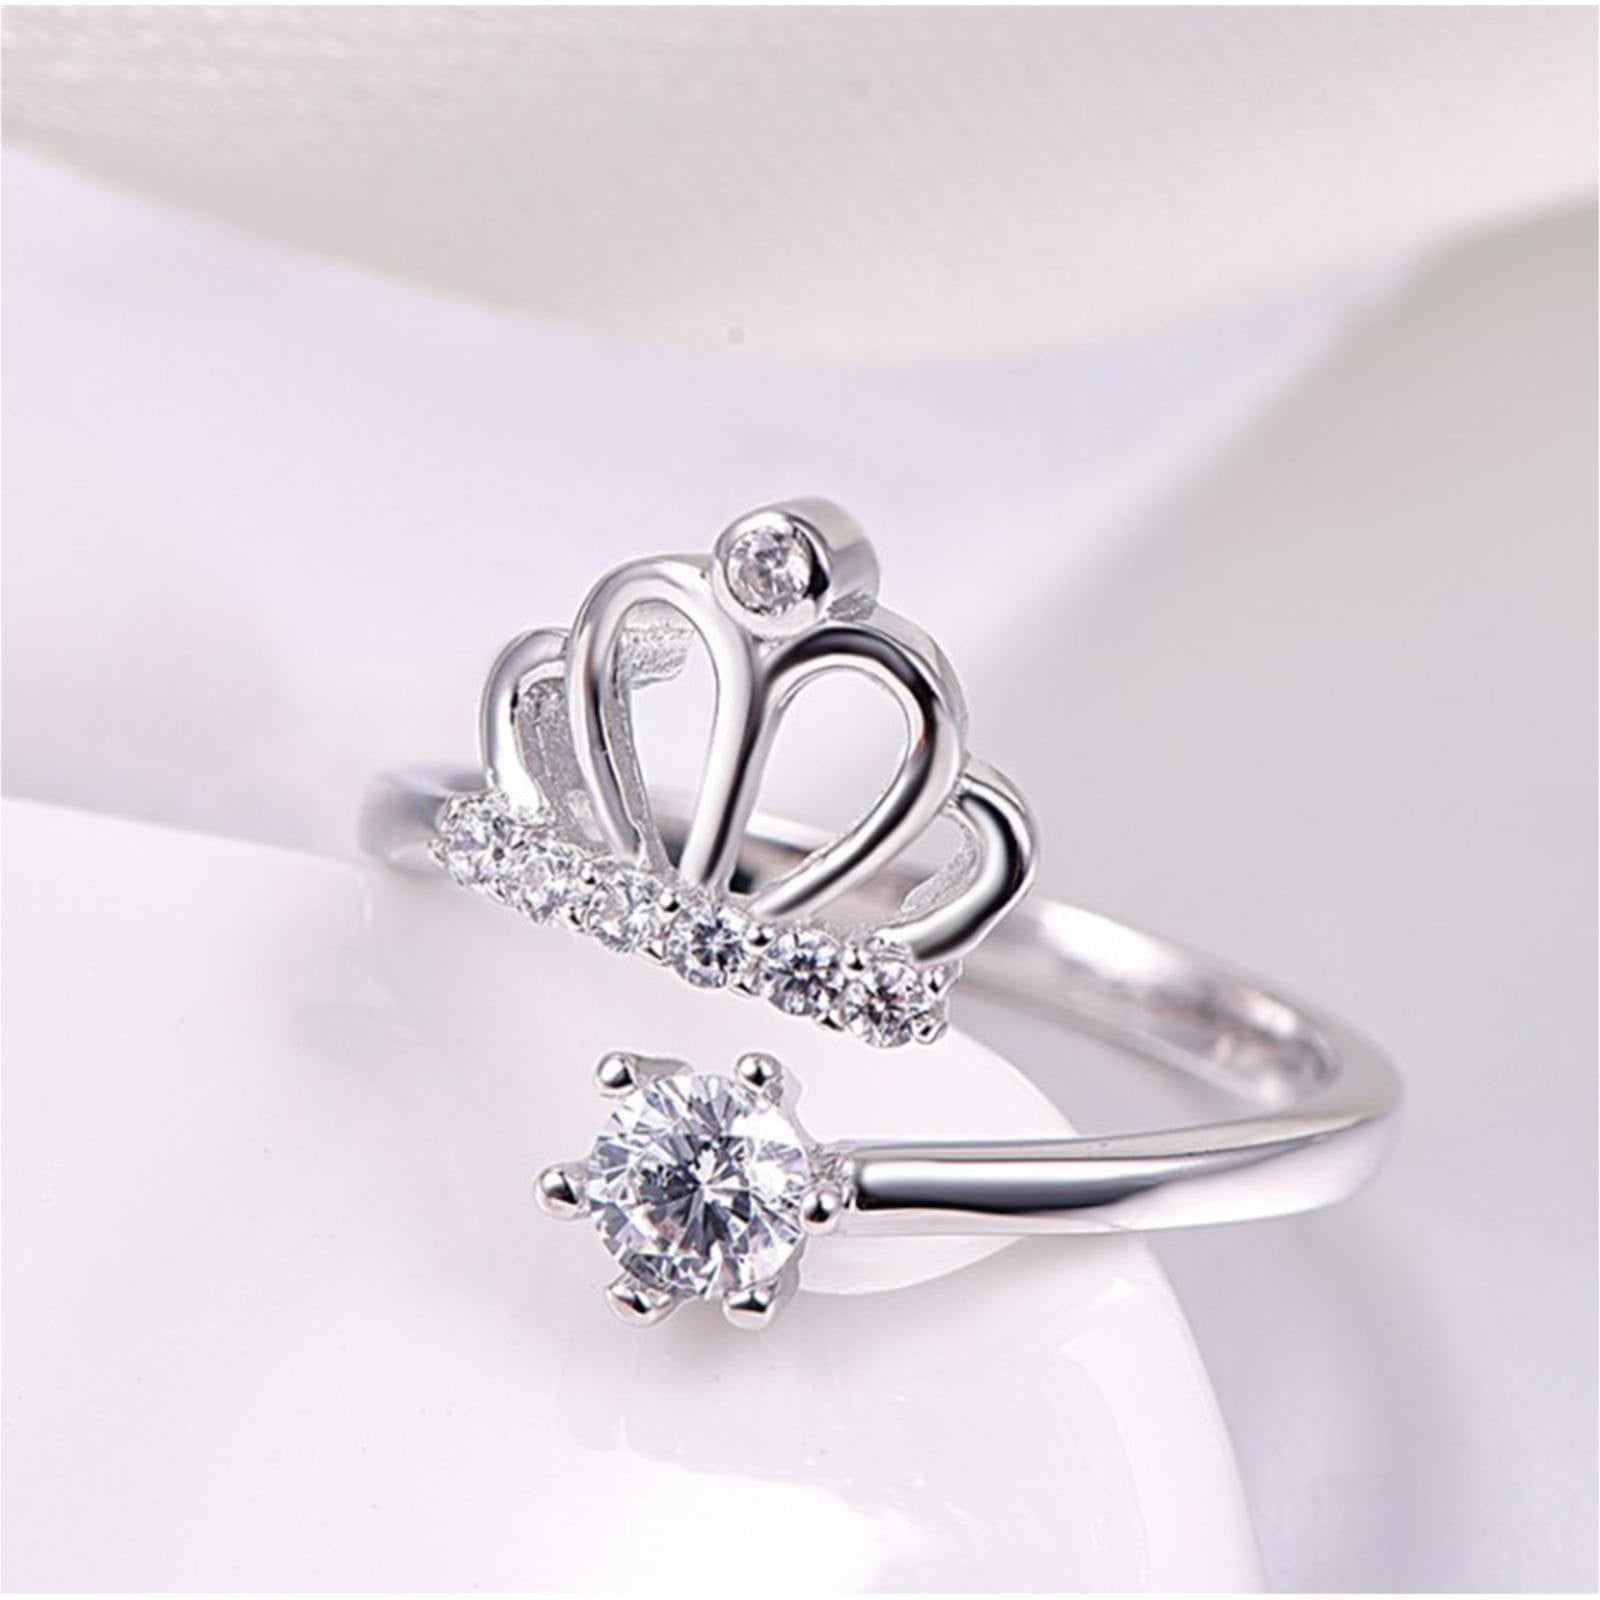 Buy BS BLOOMSTYLE Fashion New 925 Original Women Silver Jewelry Finger For  Women Crystal Heart Shape Crown Ring at Amazon.in